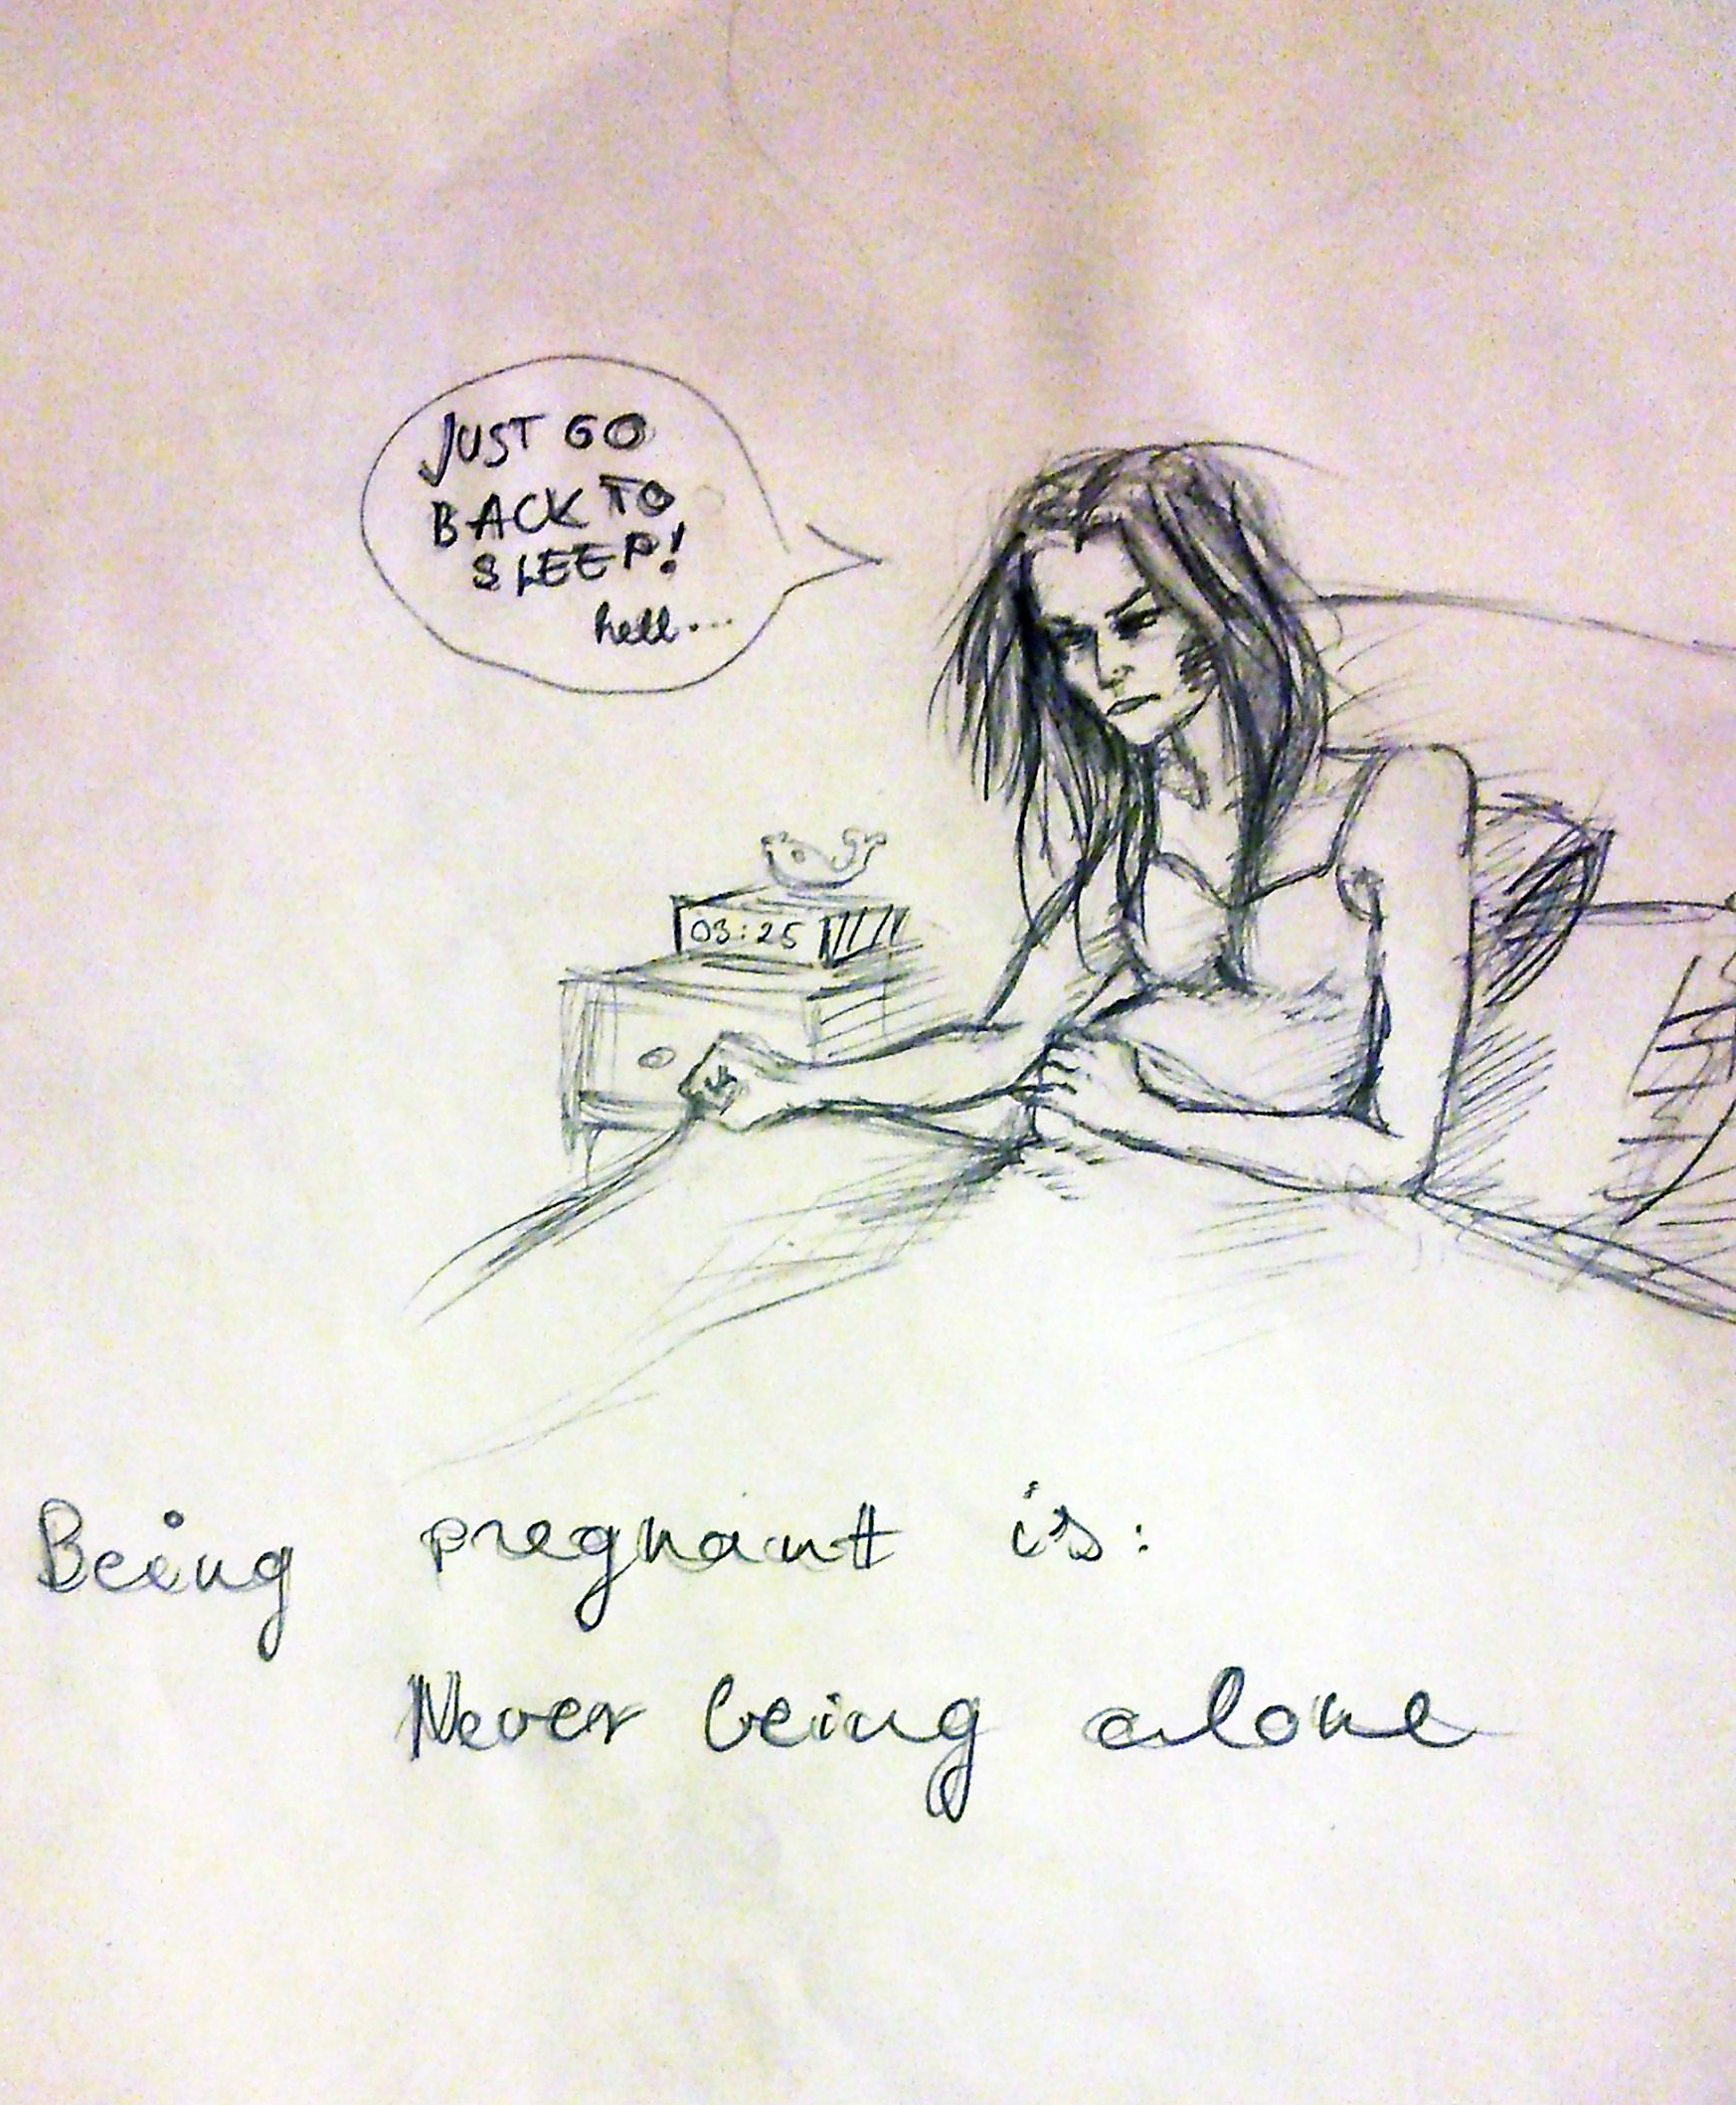 Being Pregnant And Alone 30